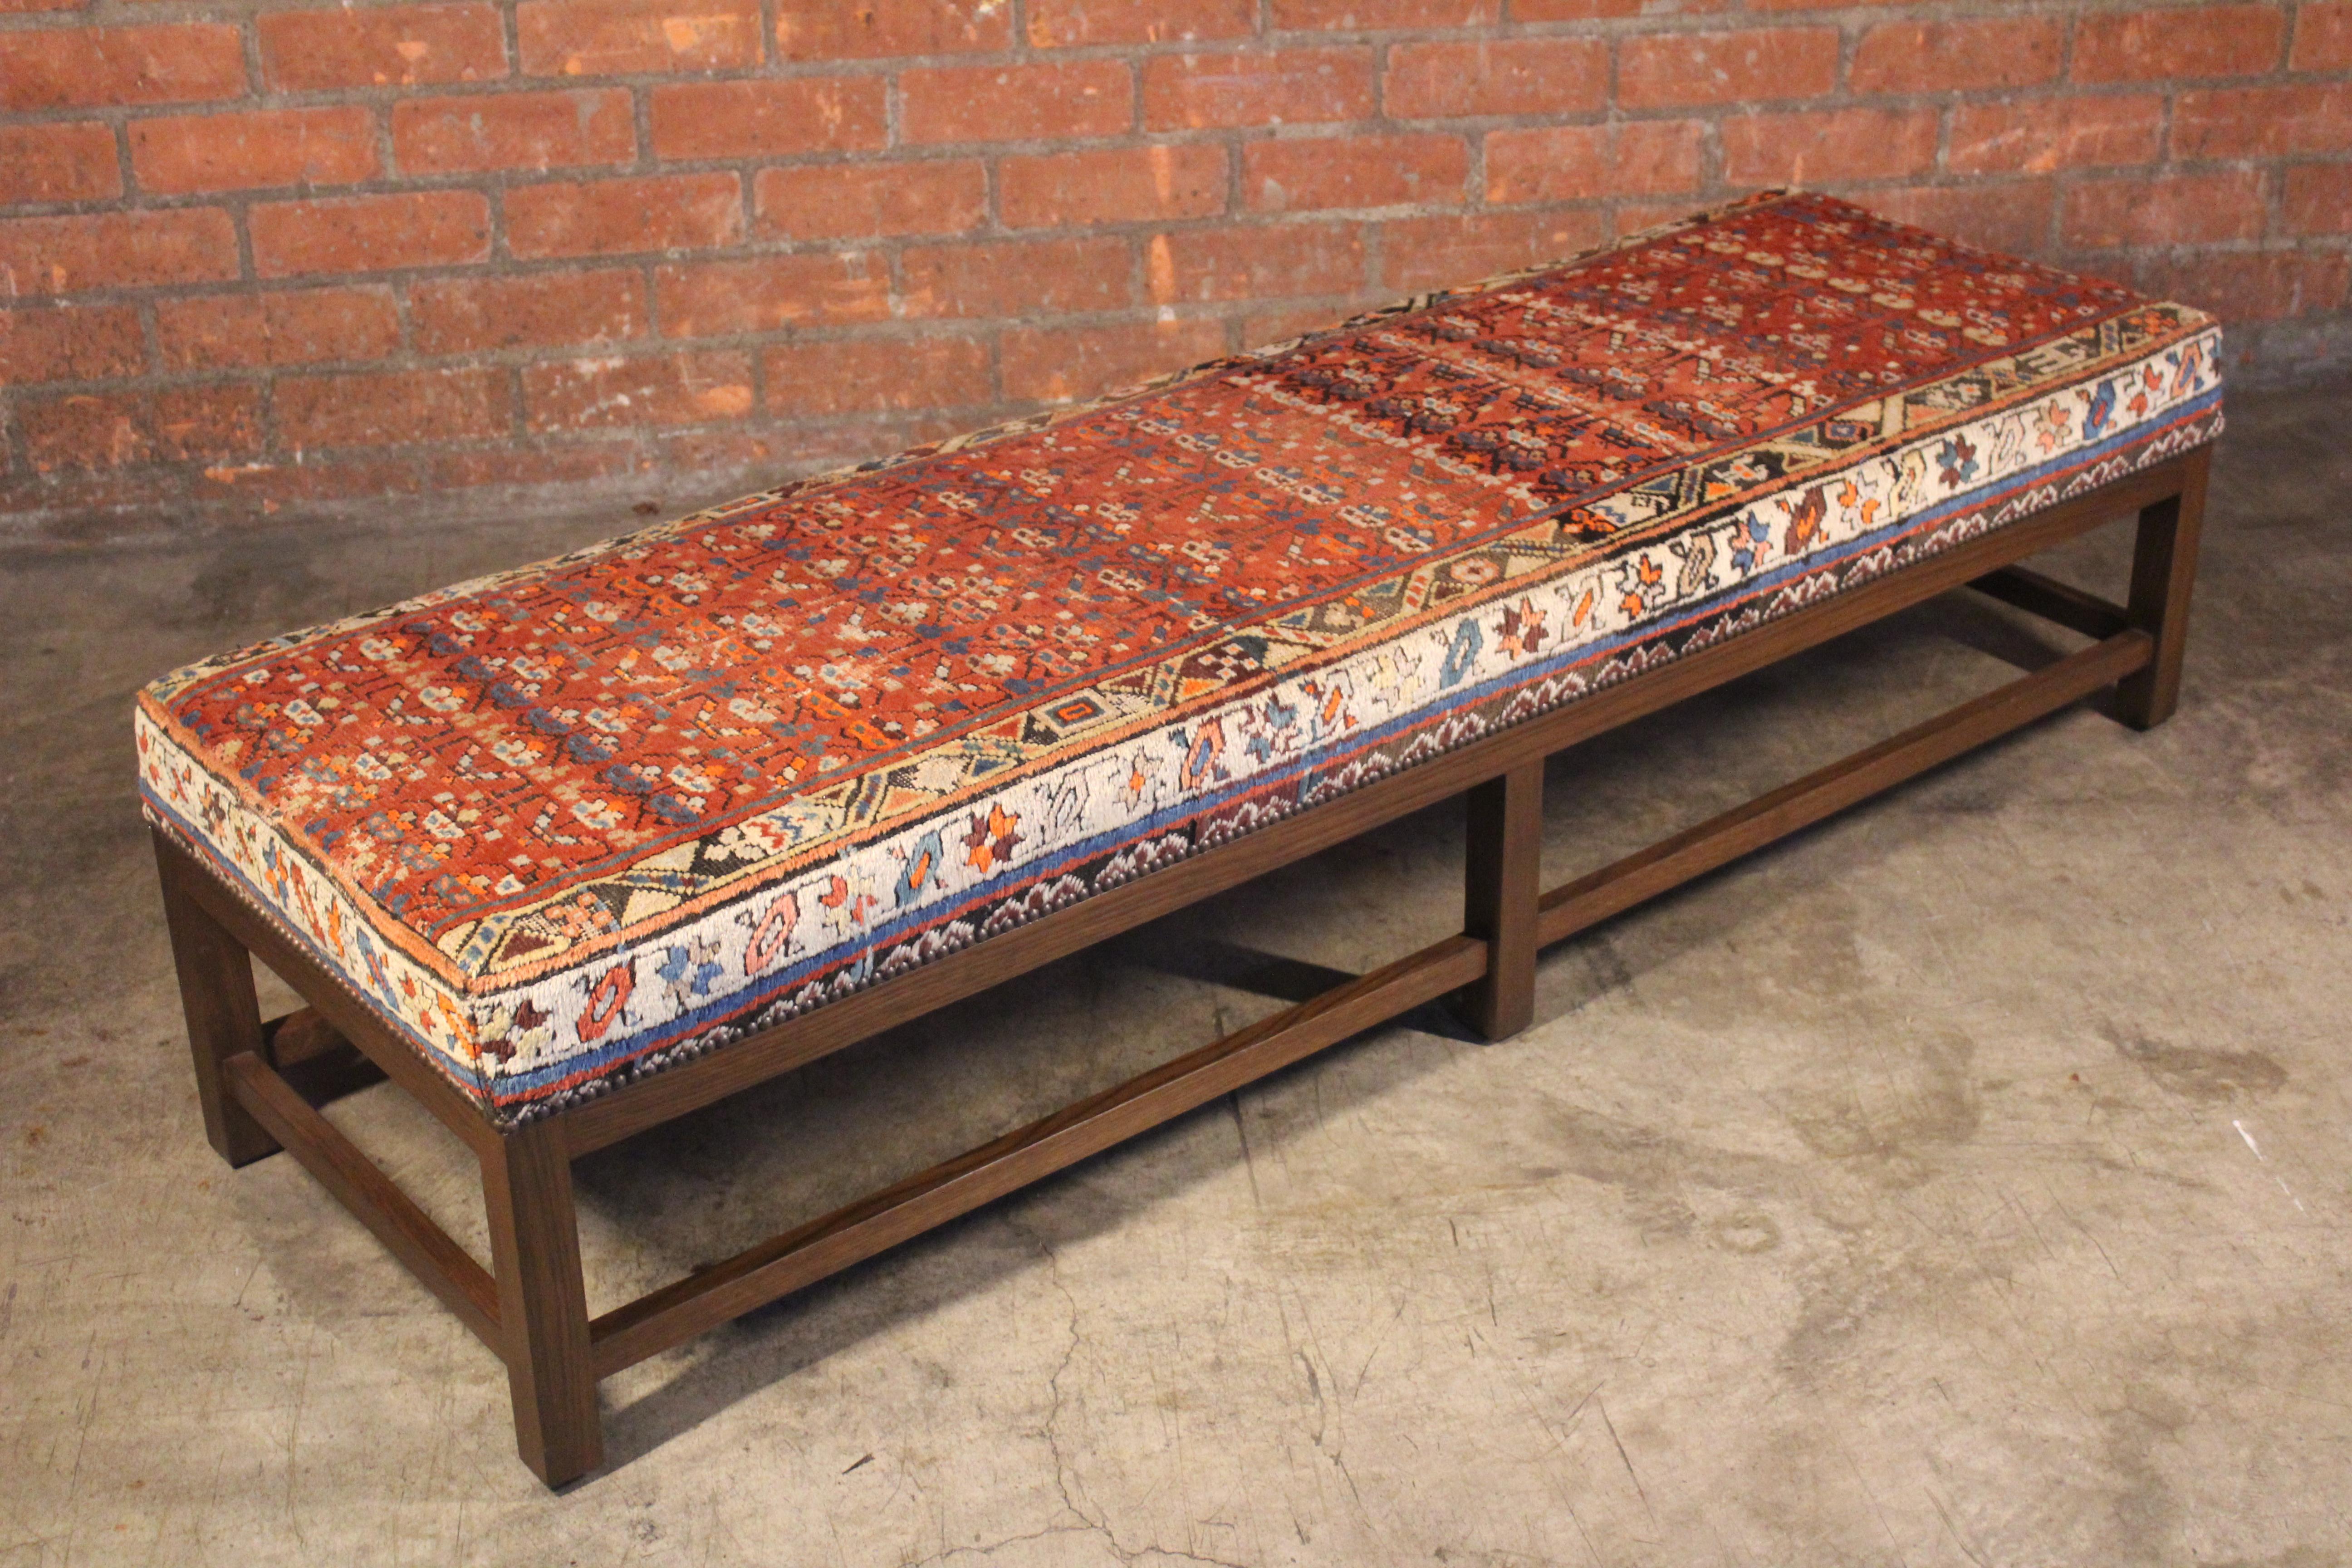 Contemporary Lexington Ottoman or Bench Upholstered in a Vintage Turkish Rug